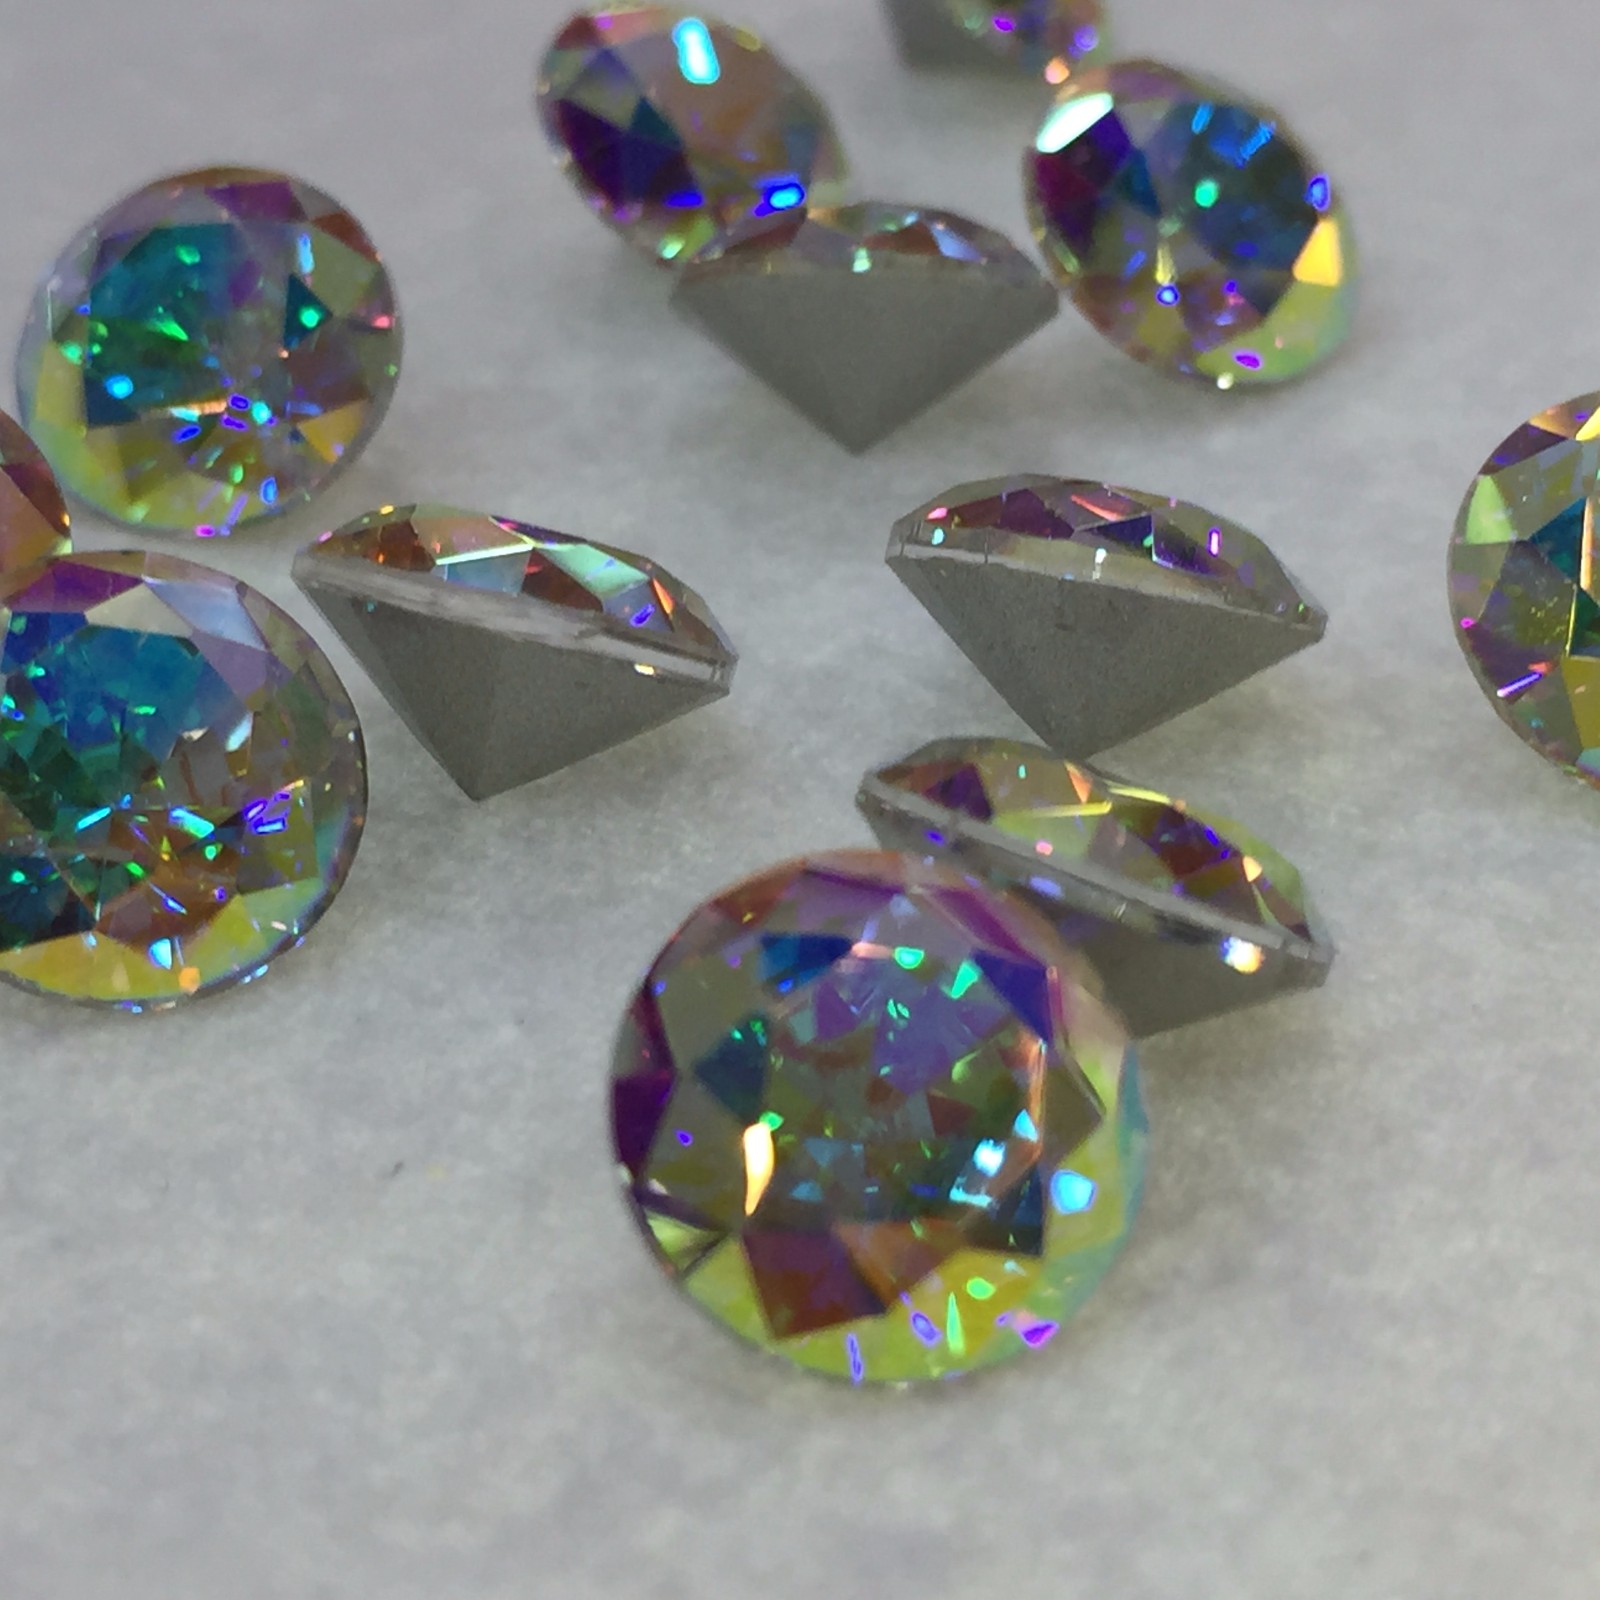 Jpstrass-High-quality Jp Strass Flat Back Glass Rhinestones With